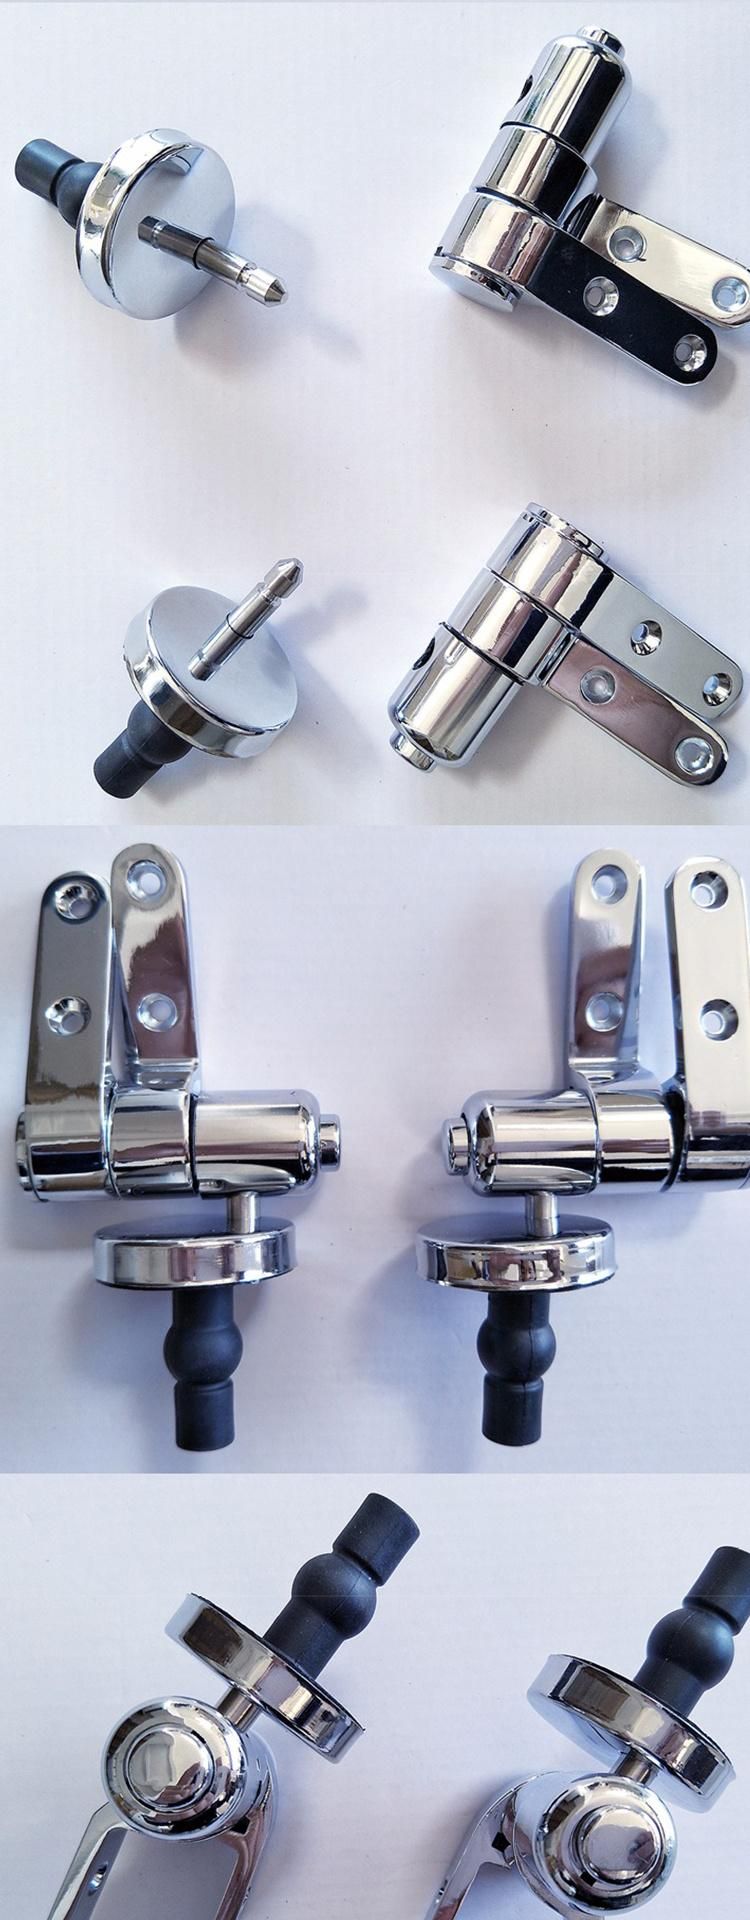 High Quality Stainless Steel Soft Close Toilet Seat Hinge